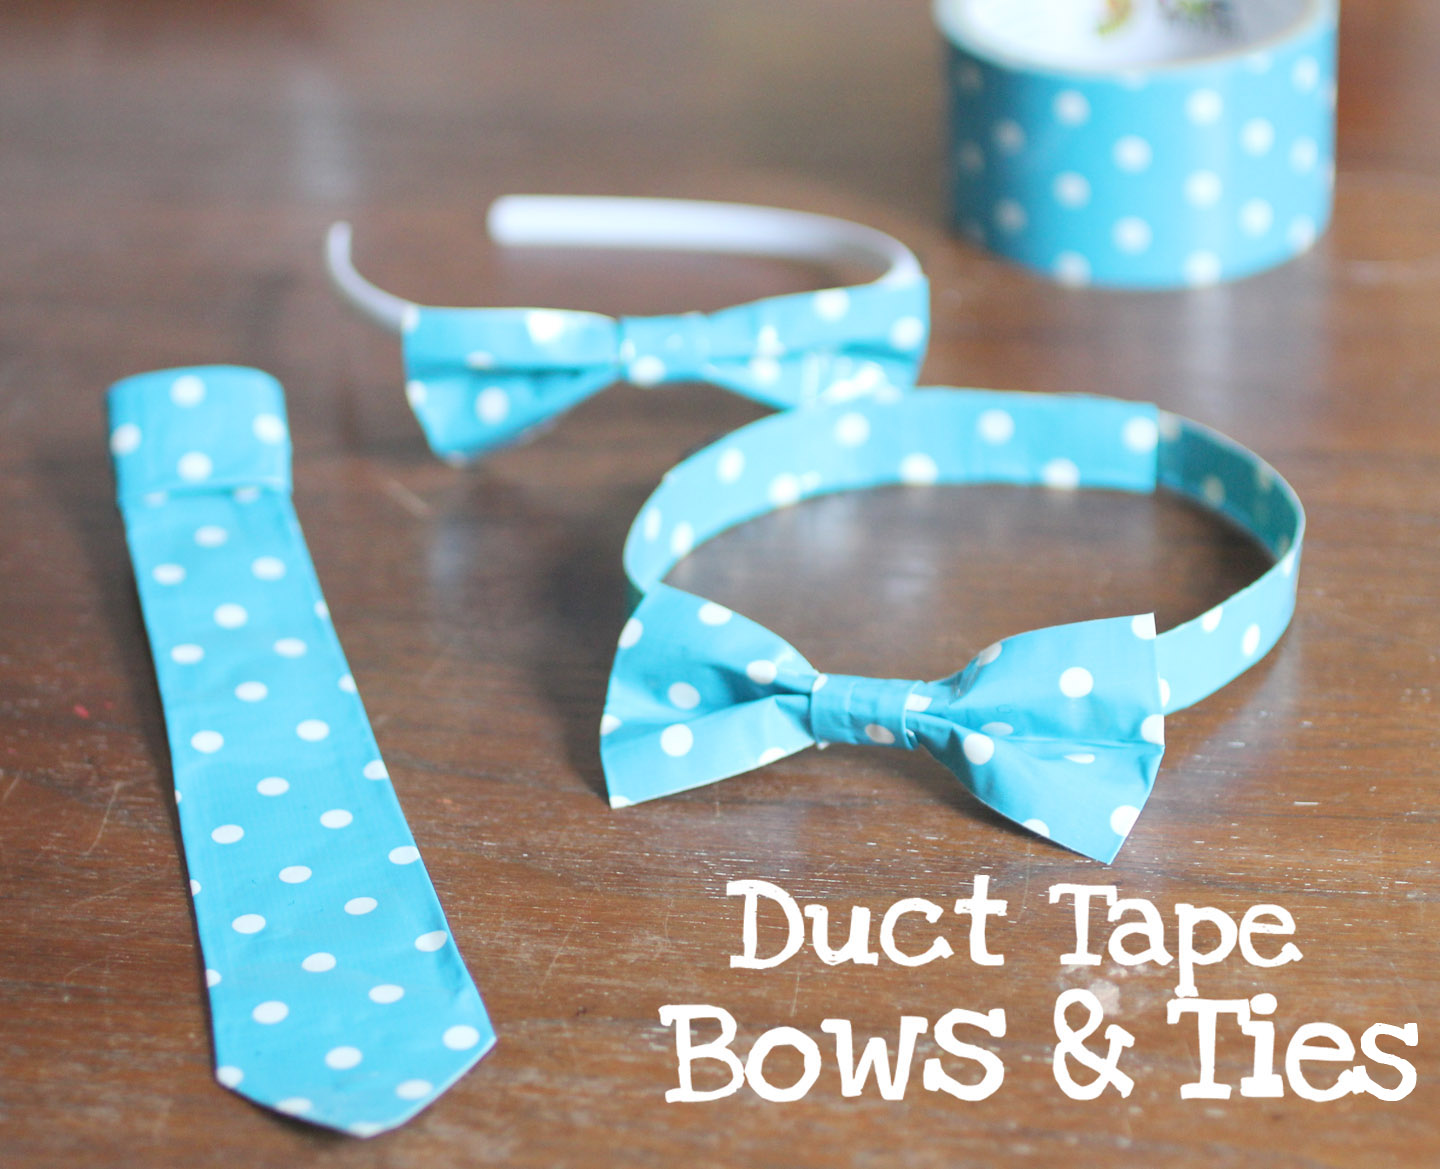 Pattern Duct Tape, perfect rainy day project!